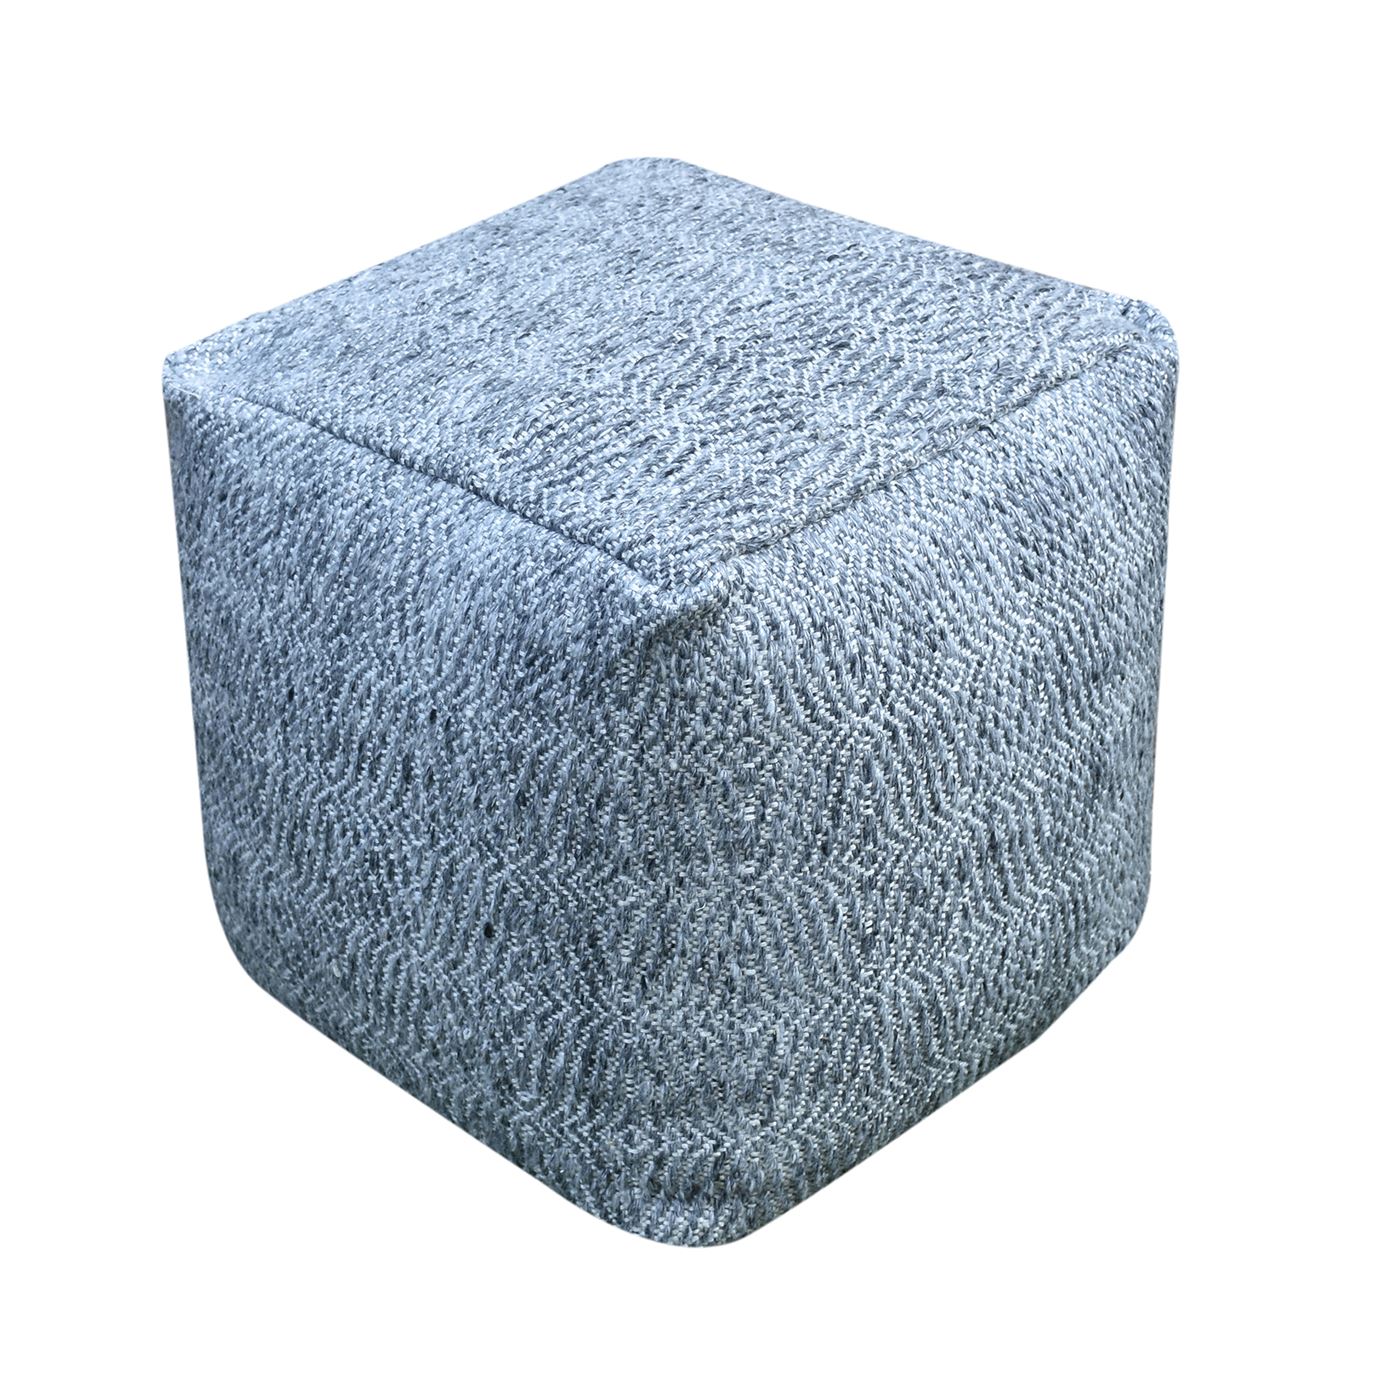 Soweto Pouf, Pet, Taupe, Pitloom, Flat Weave 